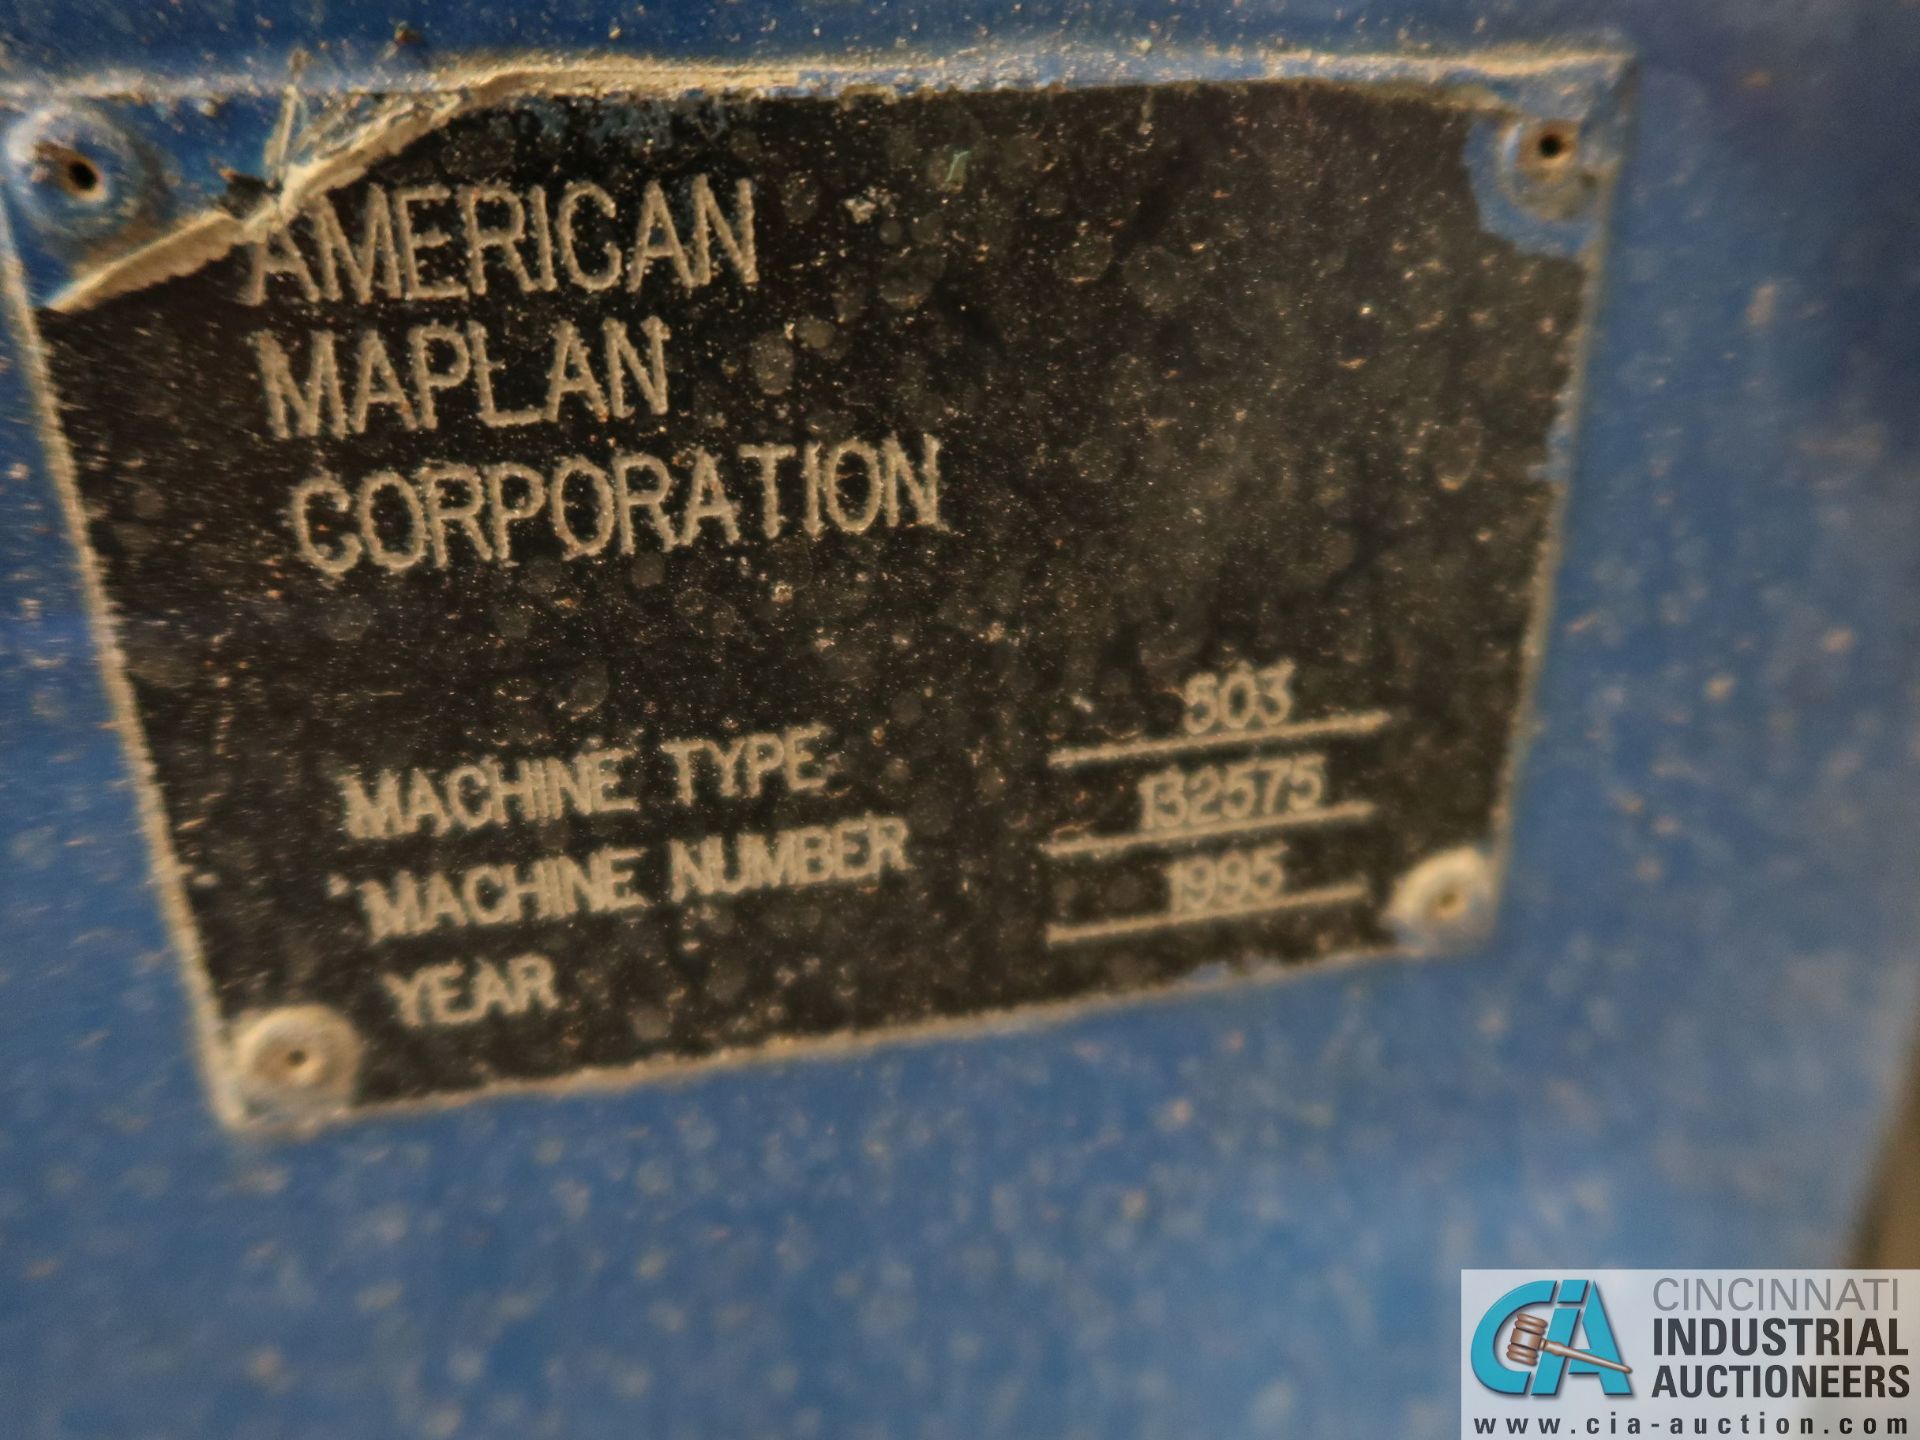 AMERICAN MAPLAN MODEL 503 PULLER; S/N 132575 (NEW 1995), 8" PULLER PADS - Image 17 of 17